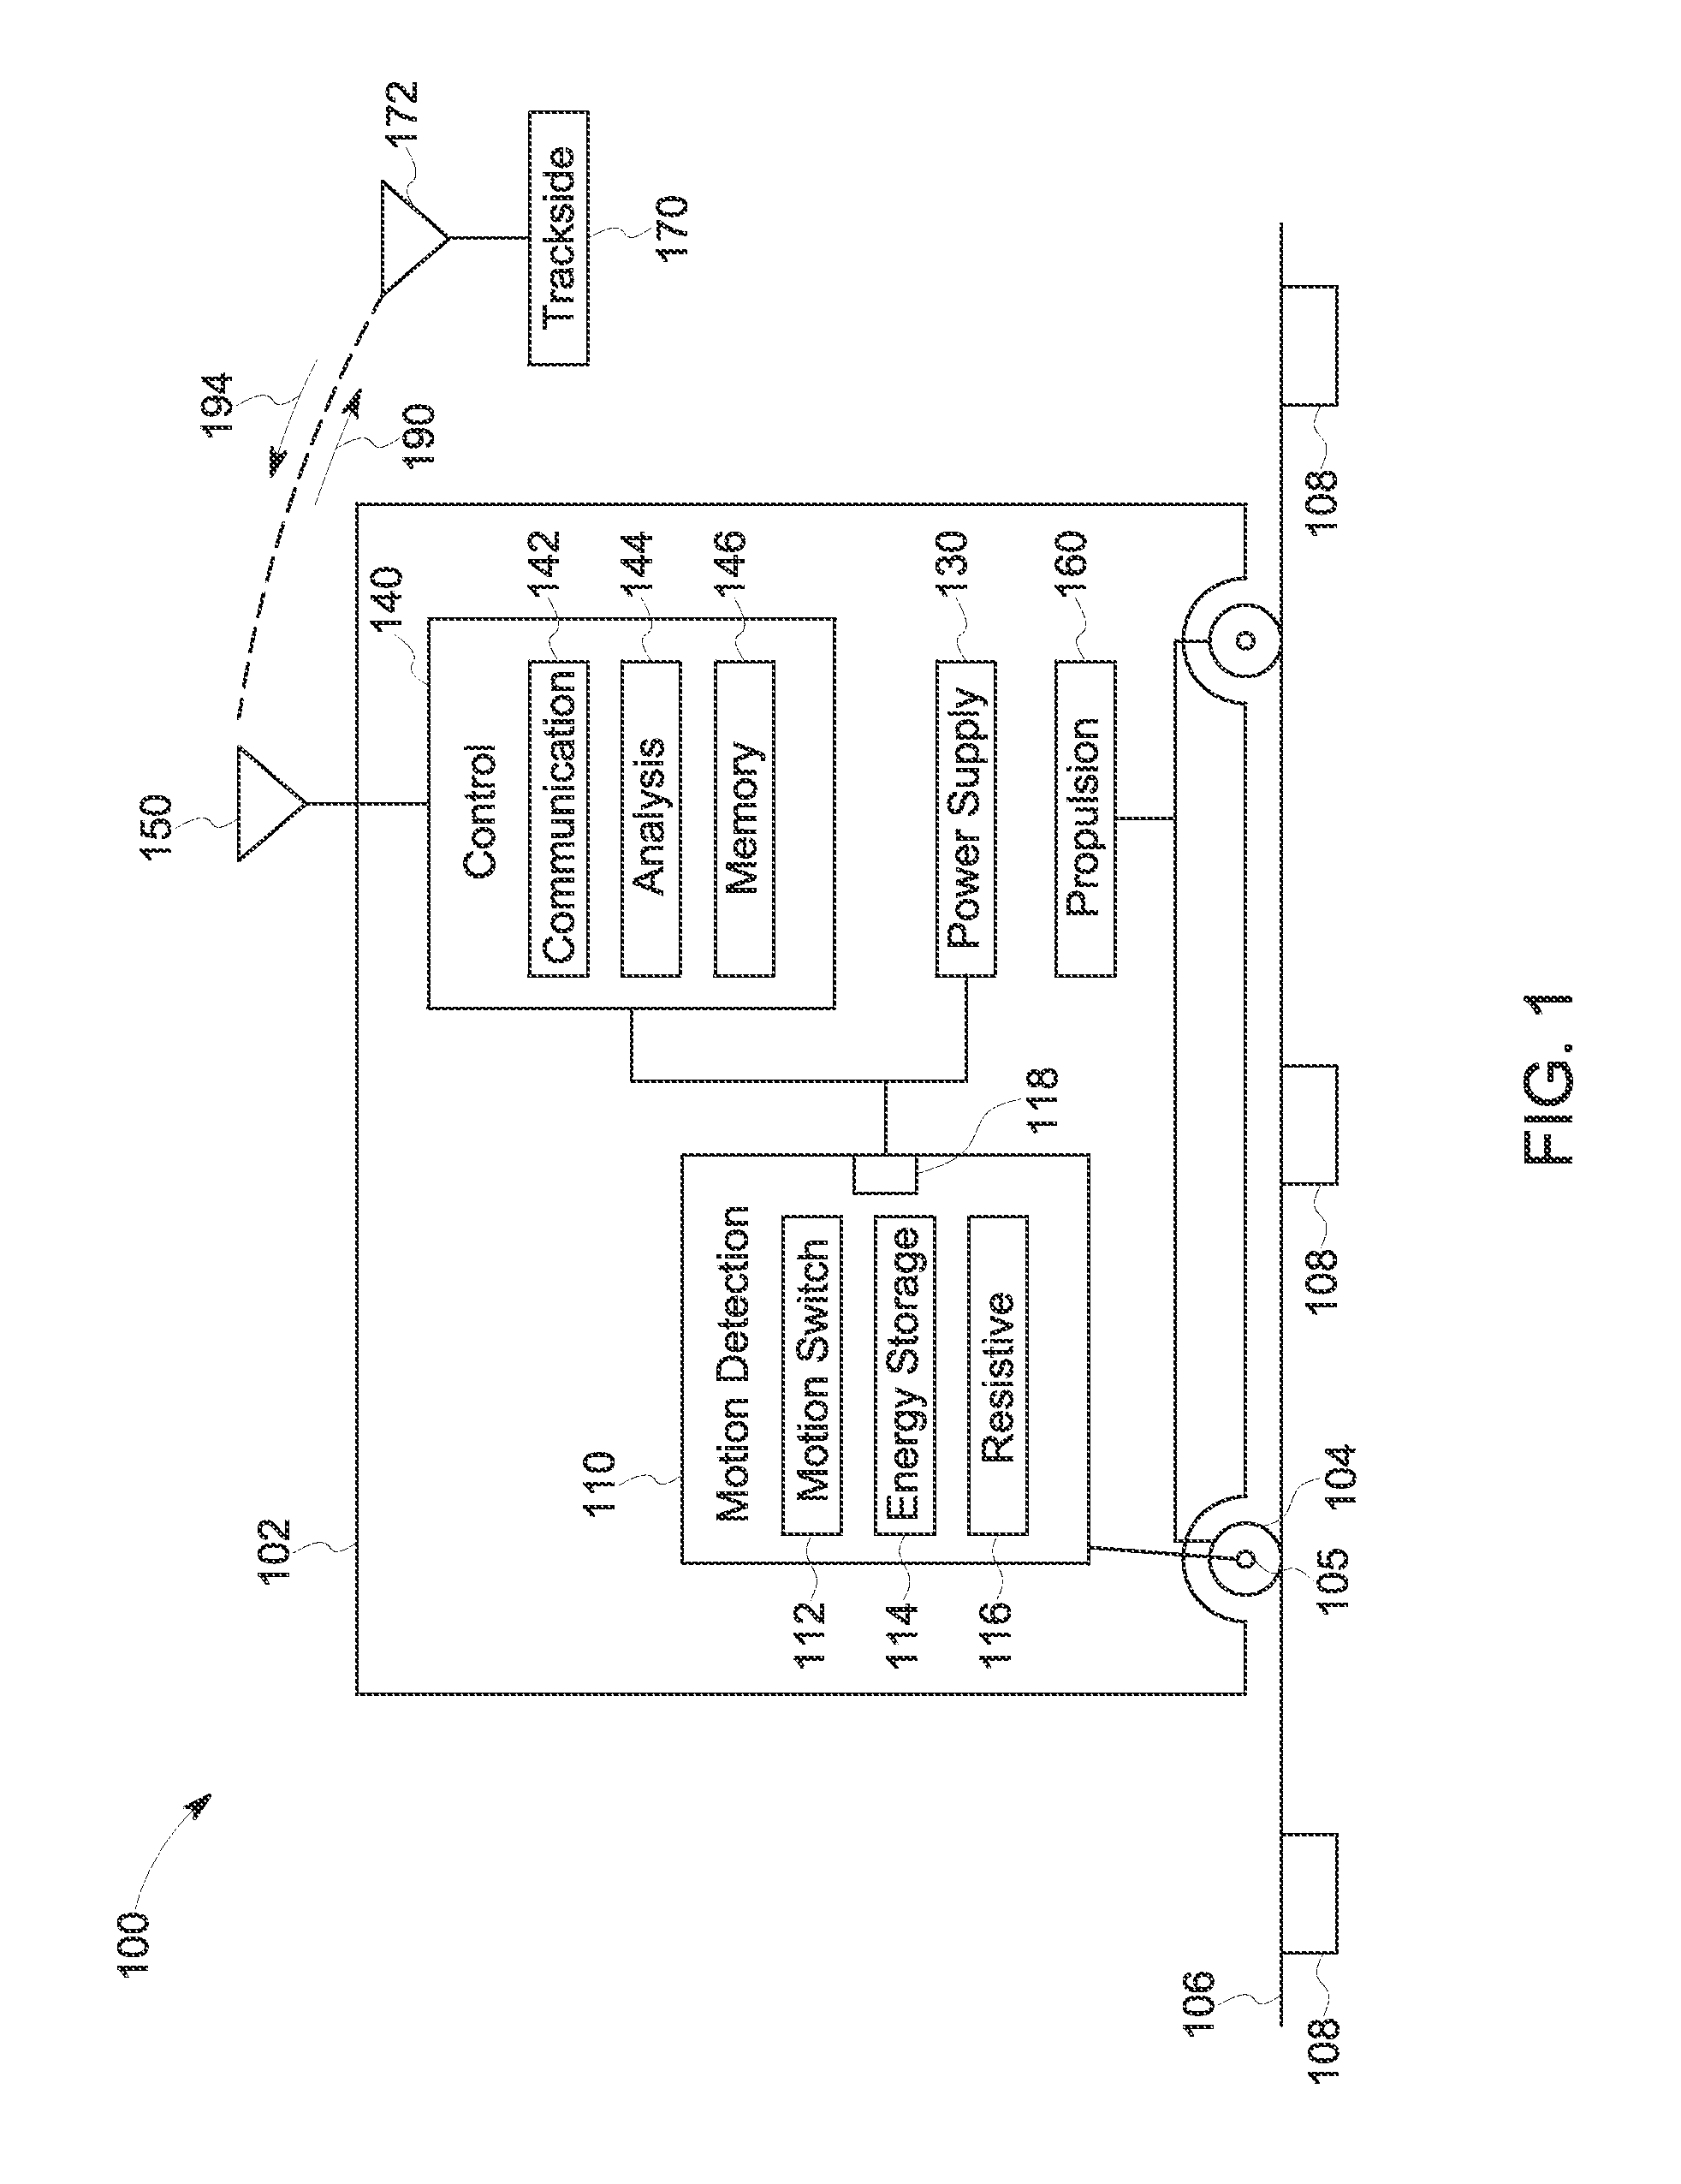 Systems and methods for cold movement detection